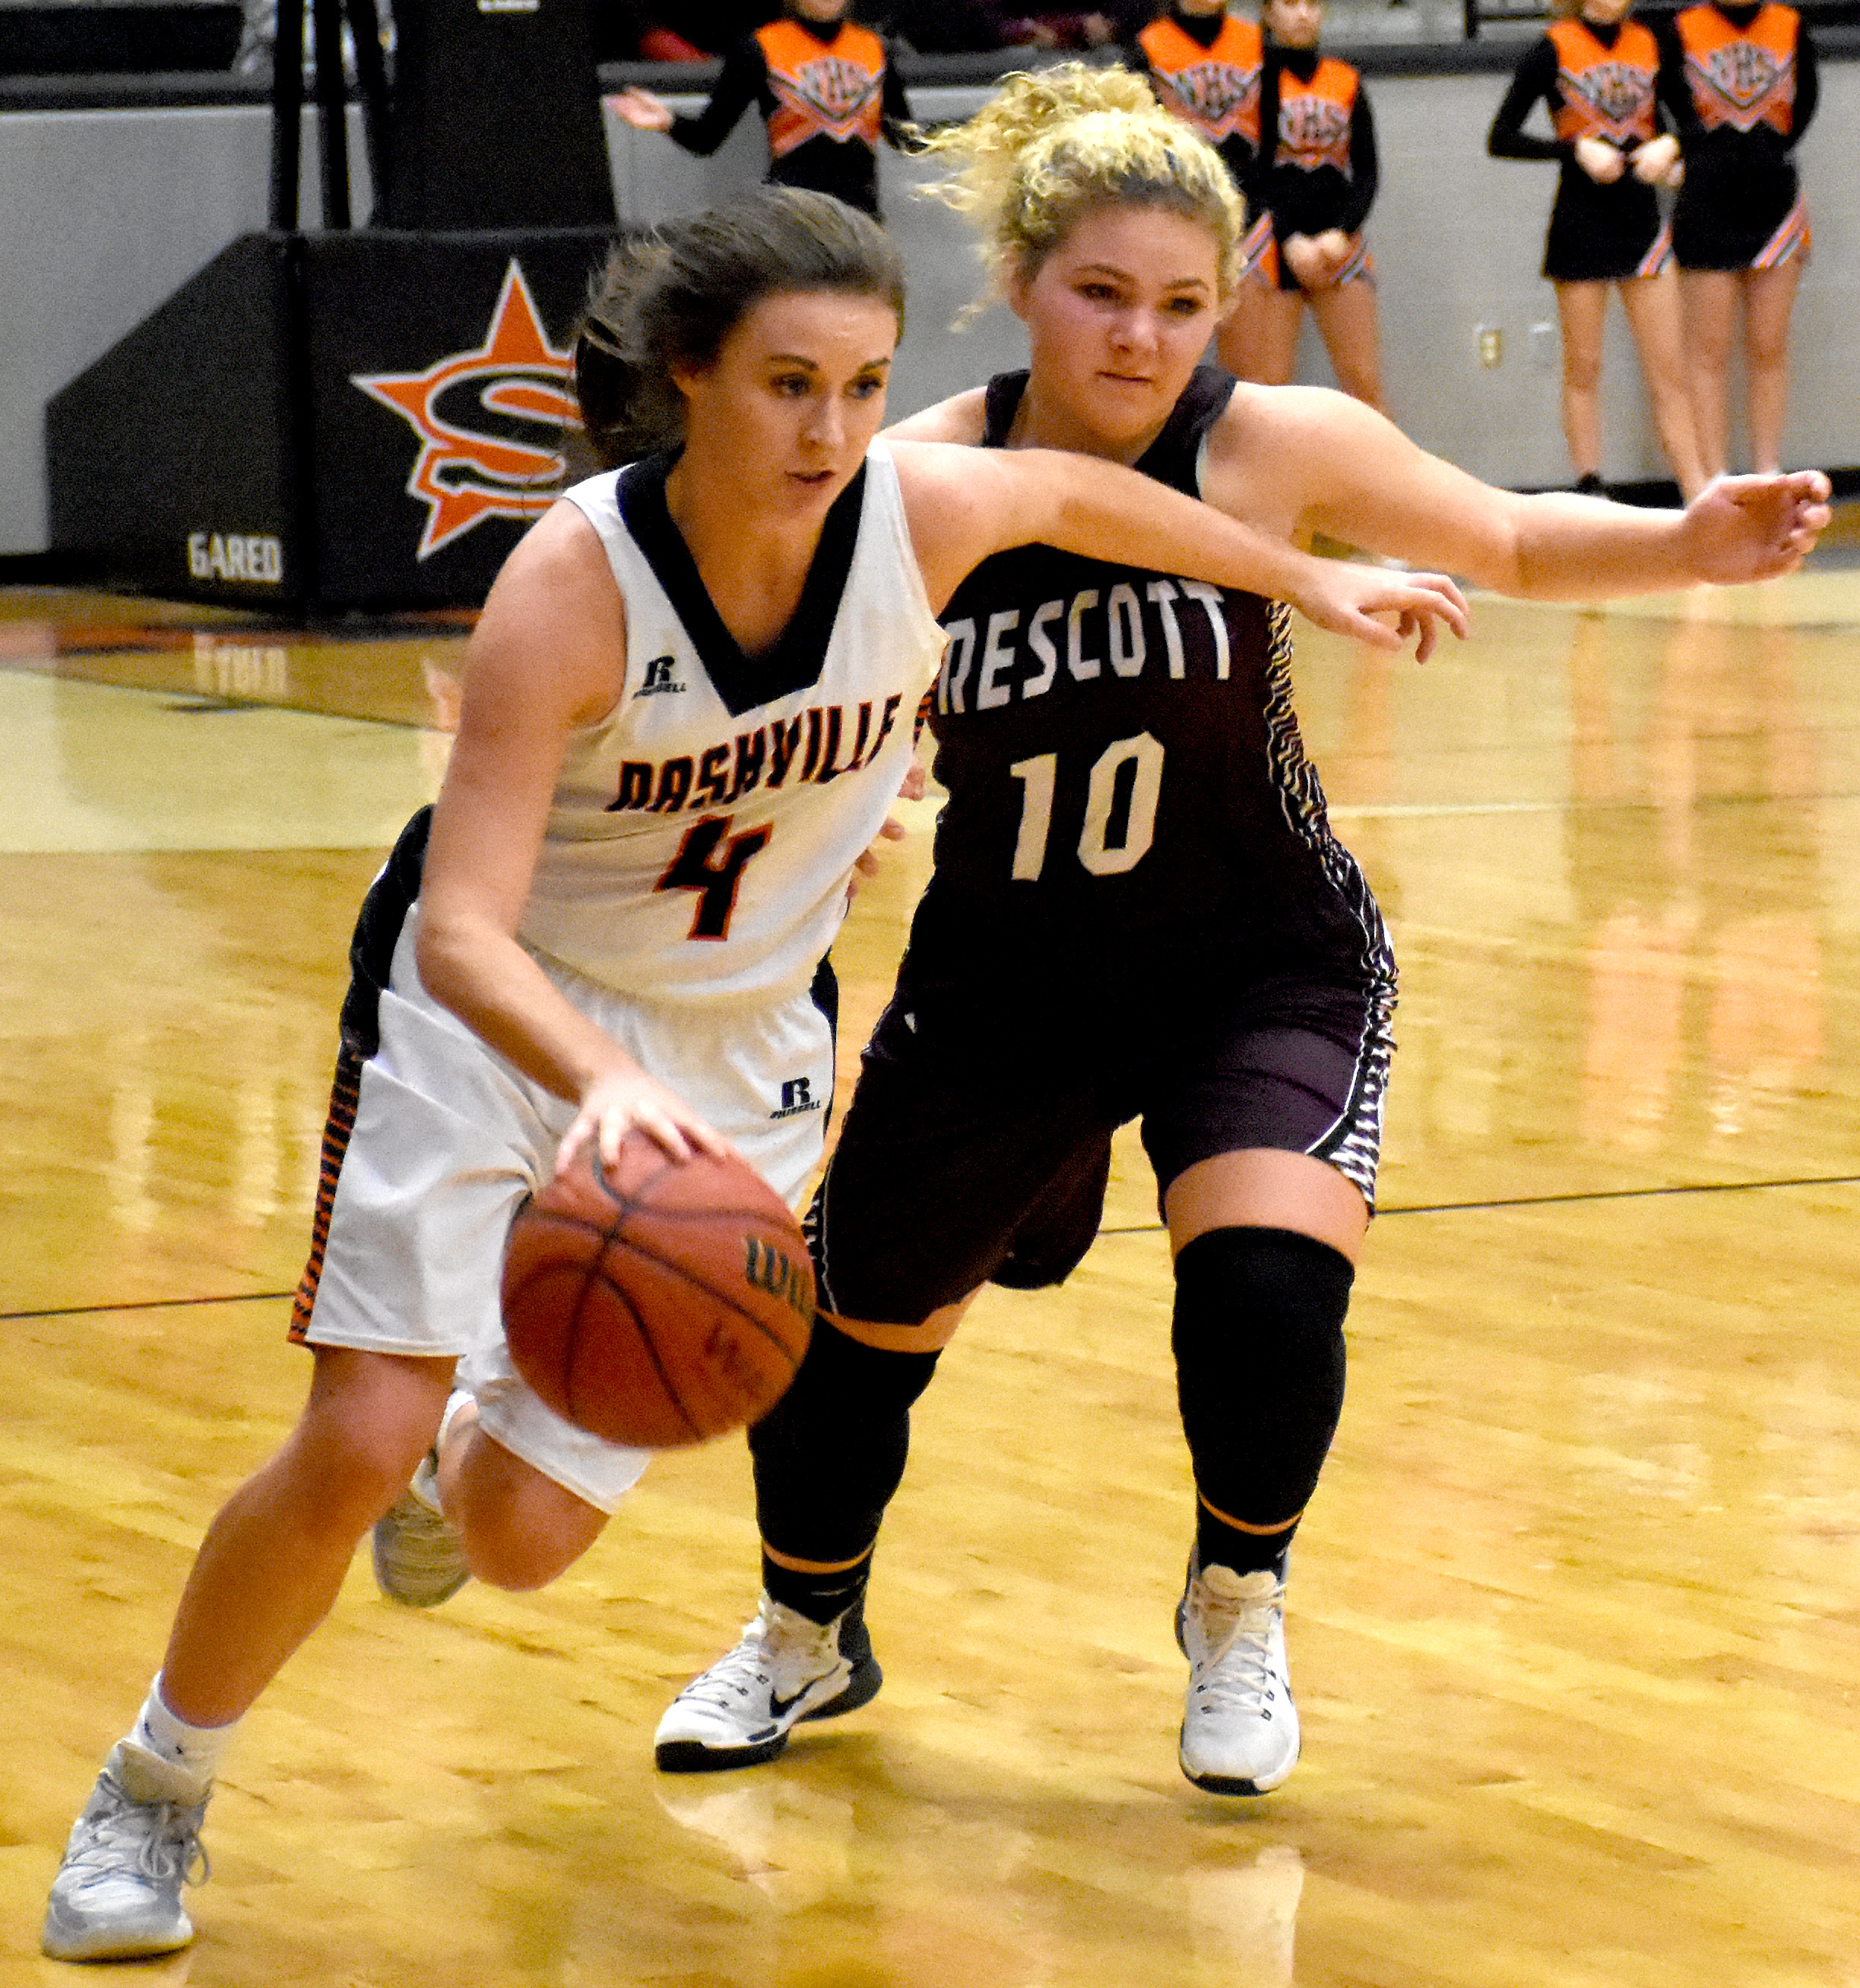 Kendall Kirchoff (4) drives the ball past the Lady Curley Wolf on her way to a basket for the Scrapperettes.